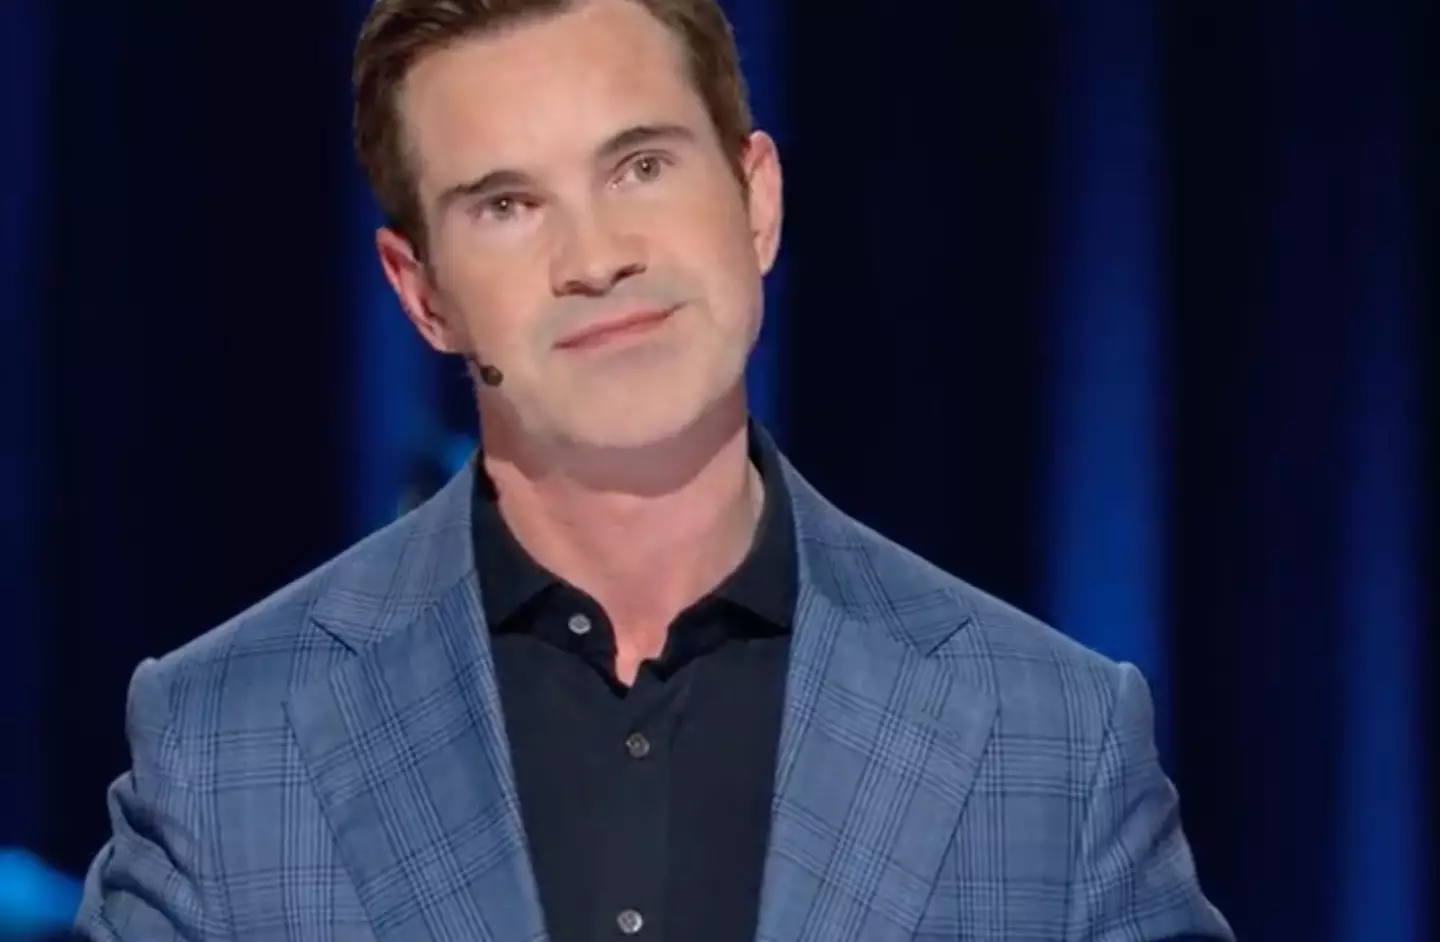 Jimmy Carr shared a selection of his ‘darkest jokes’.